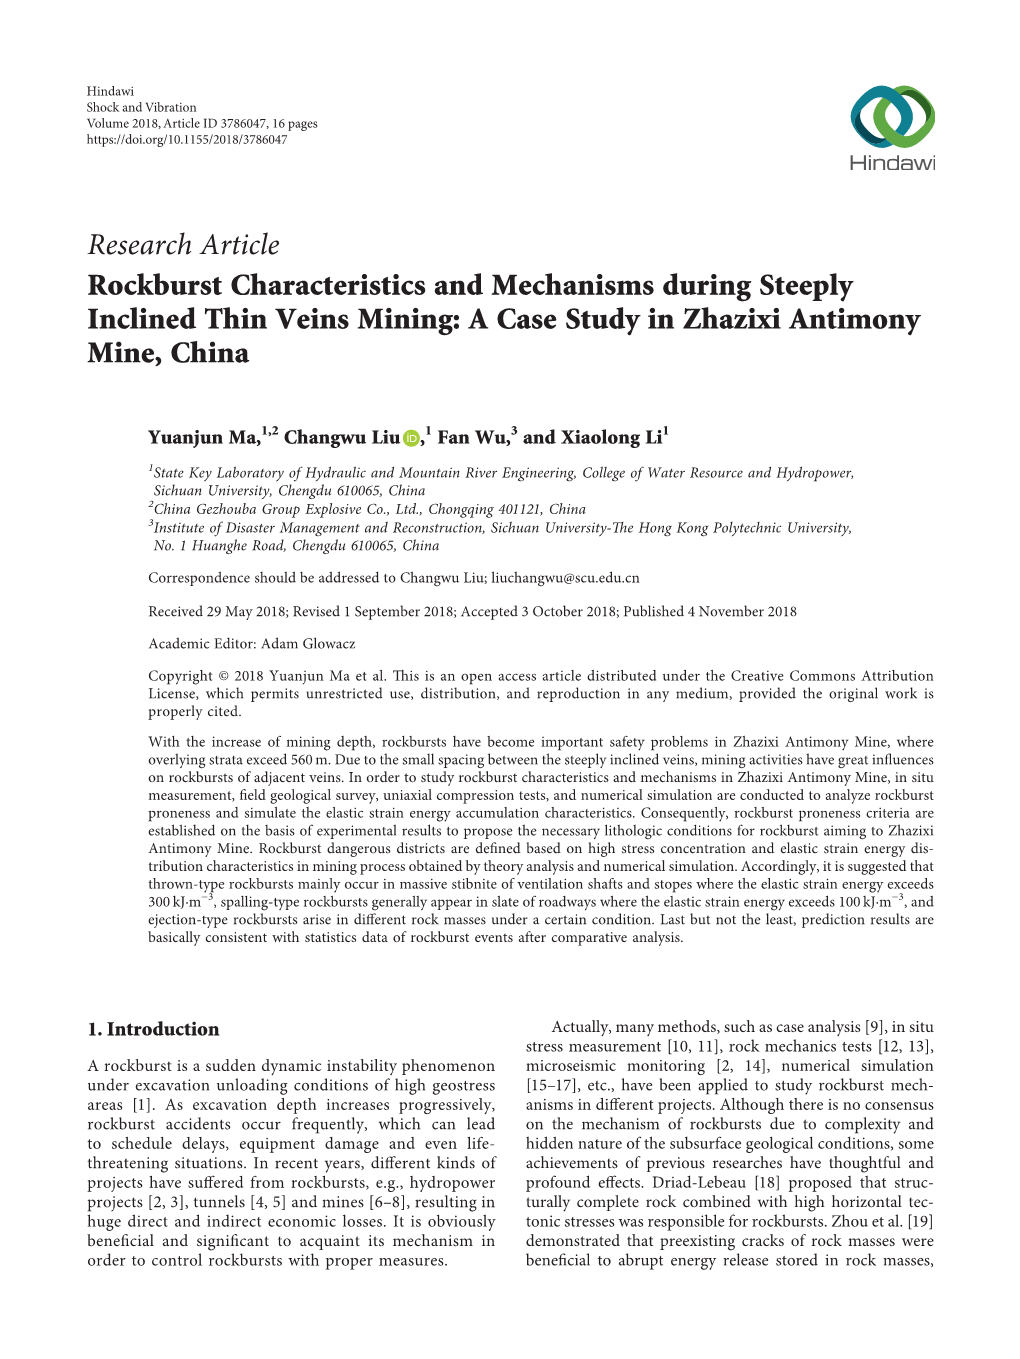 Rockburst Characteristics and Mechanisms During Steeply Inclined Thin Veins Mining: a Case Study in Zhazixi Antimony Mine, China